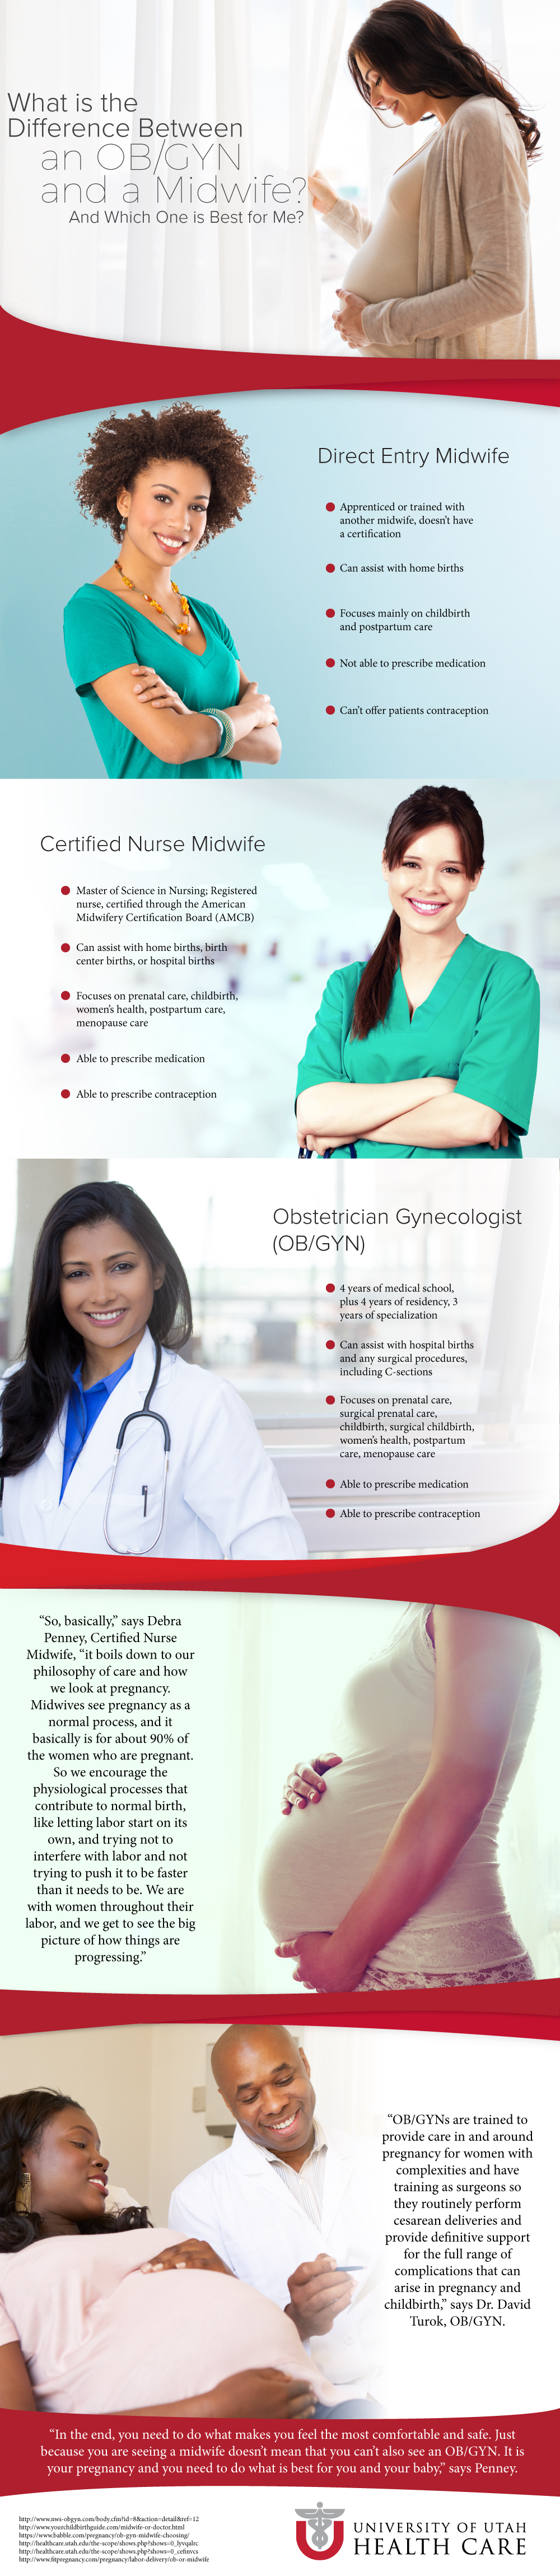 Infographic of differences between OBGYN and midwife